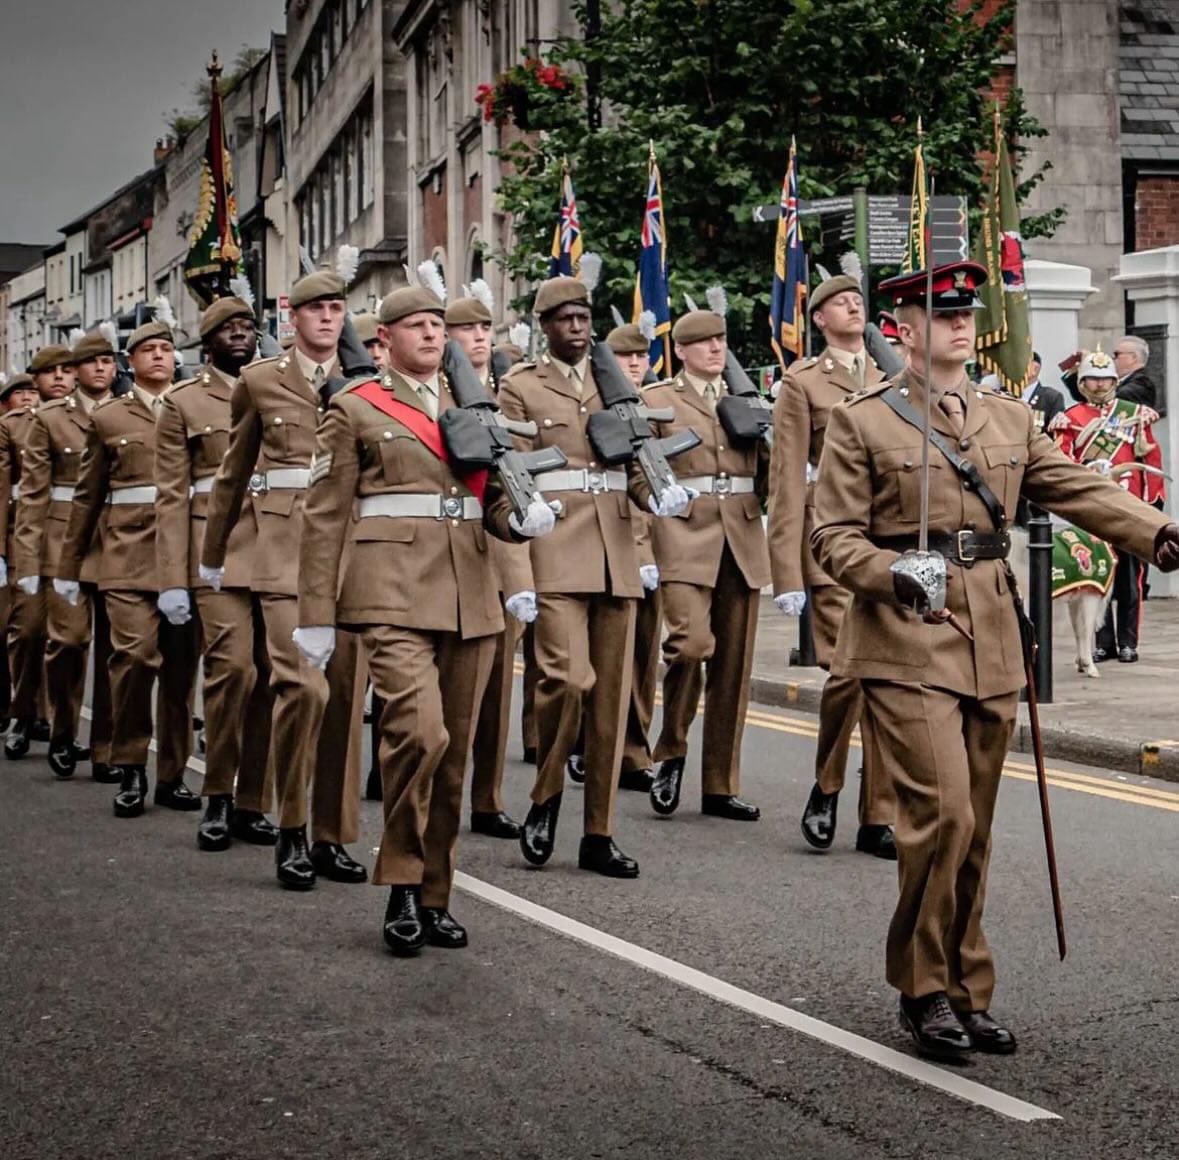 Soldiers from 1st Btn @TheRoyalWelsh will parade from the Guildhall to the LC to reaffirm the Regiment’s Freedom of the City of Swansea tomorrow. Always a colourful spectacle, cheer on the troops from 11am. 🏴󠁧󠁢󠁷󠁬󠁳󠁿🏴󠁧󠁢󠁷󠁬󠁳󠁿🏴󠁧󠁢󠁷󠁬󠁳󠁿👏 #Wales @BBCWalesNews @WalesOnline @ITVWales @SwanseaCouncil